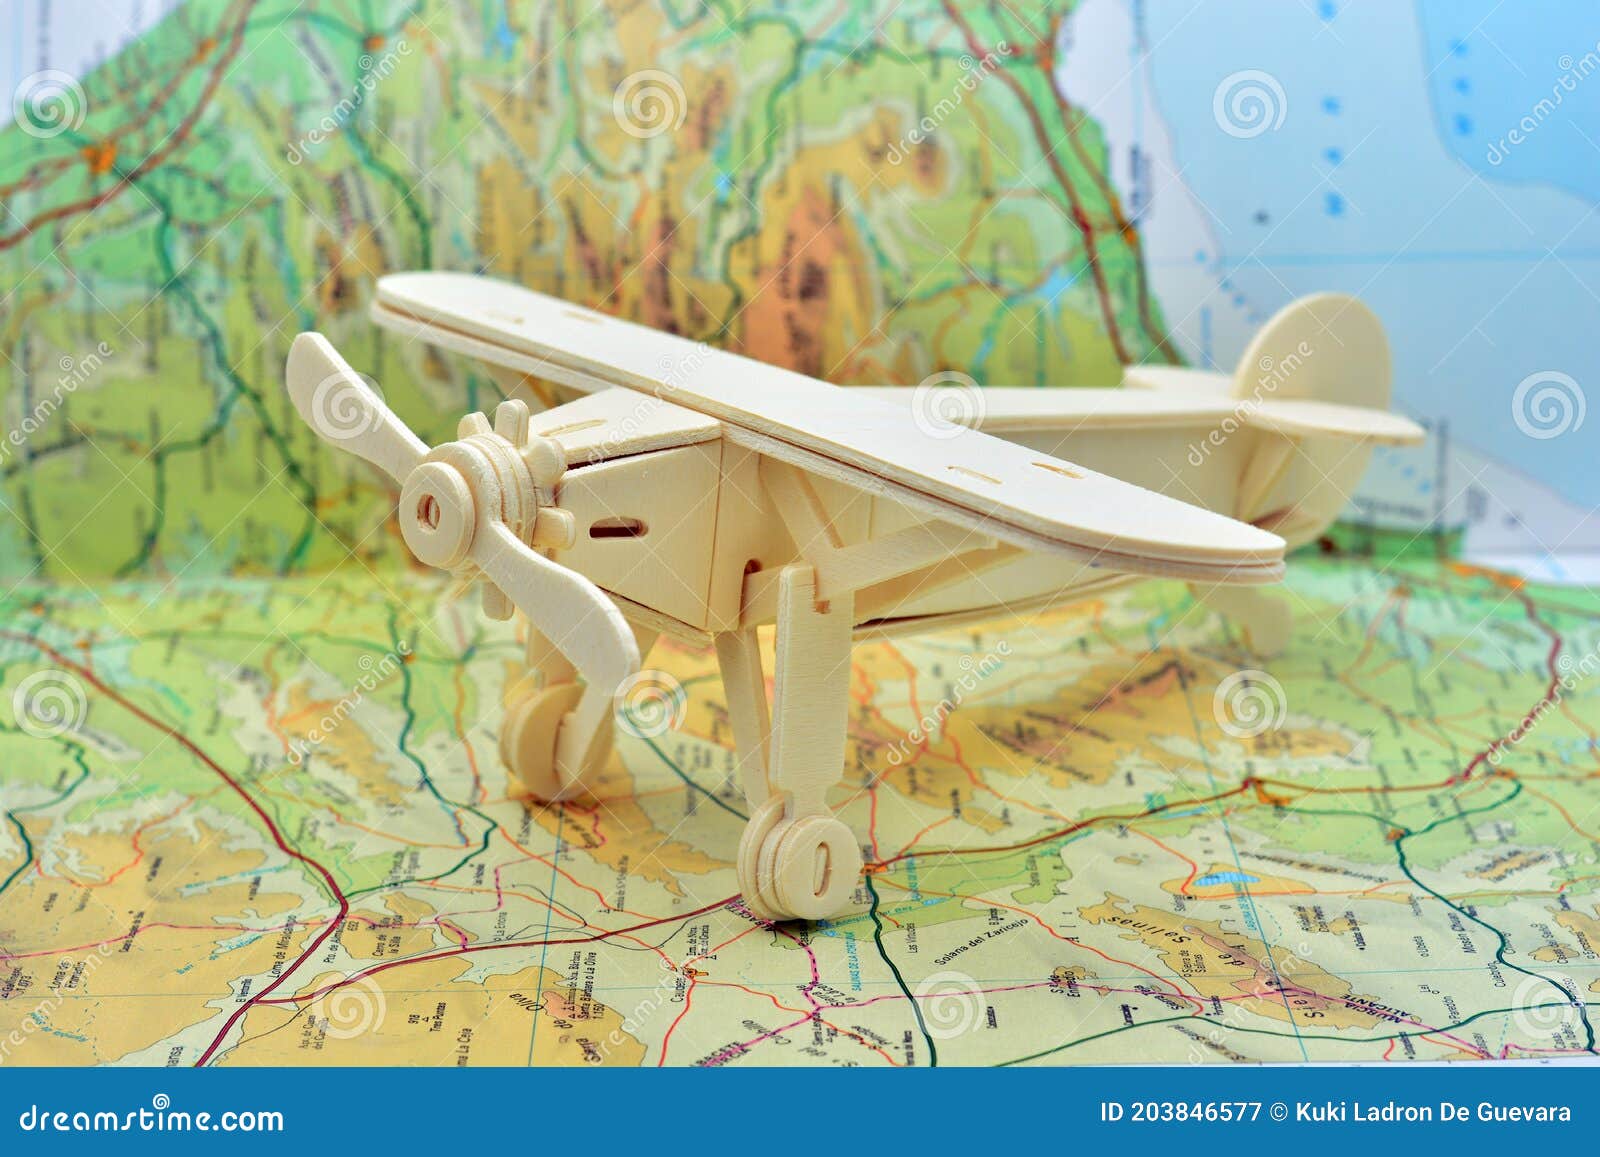 wooden plane on a map